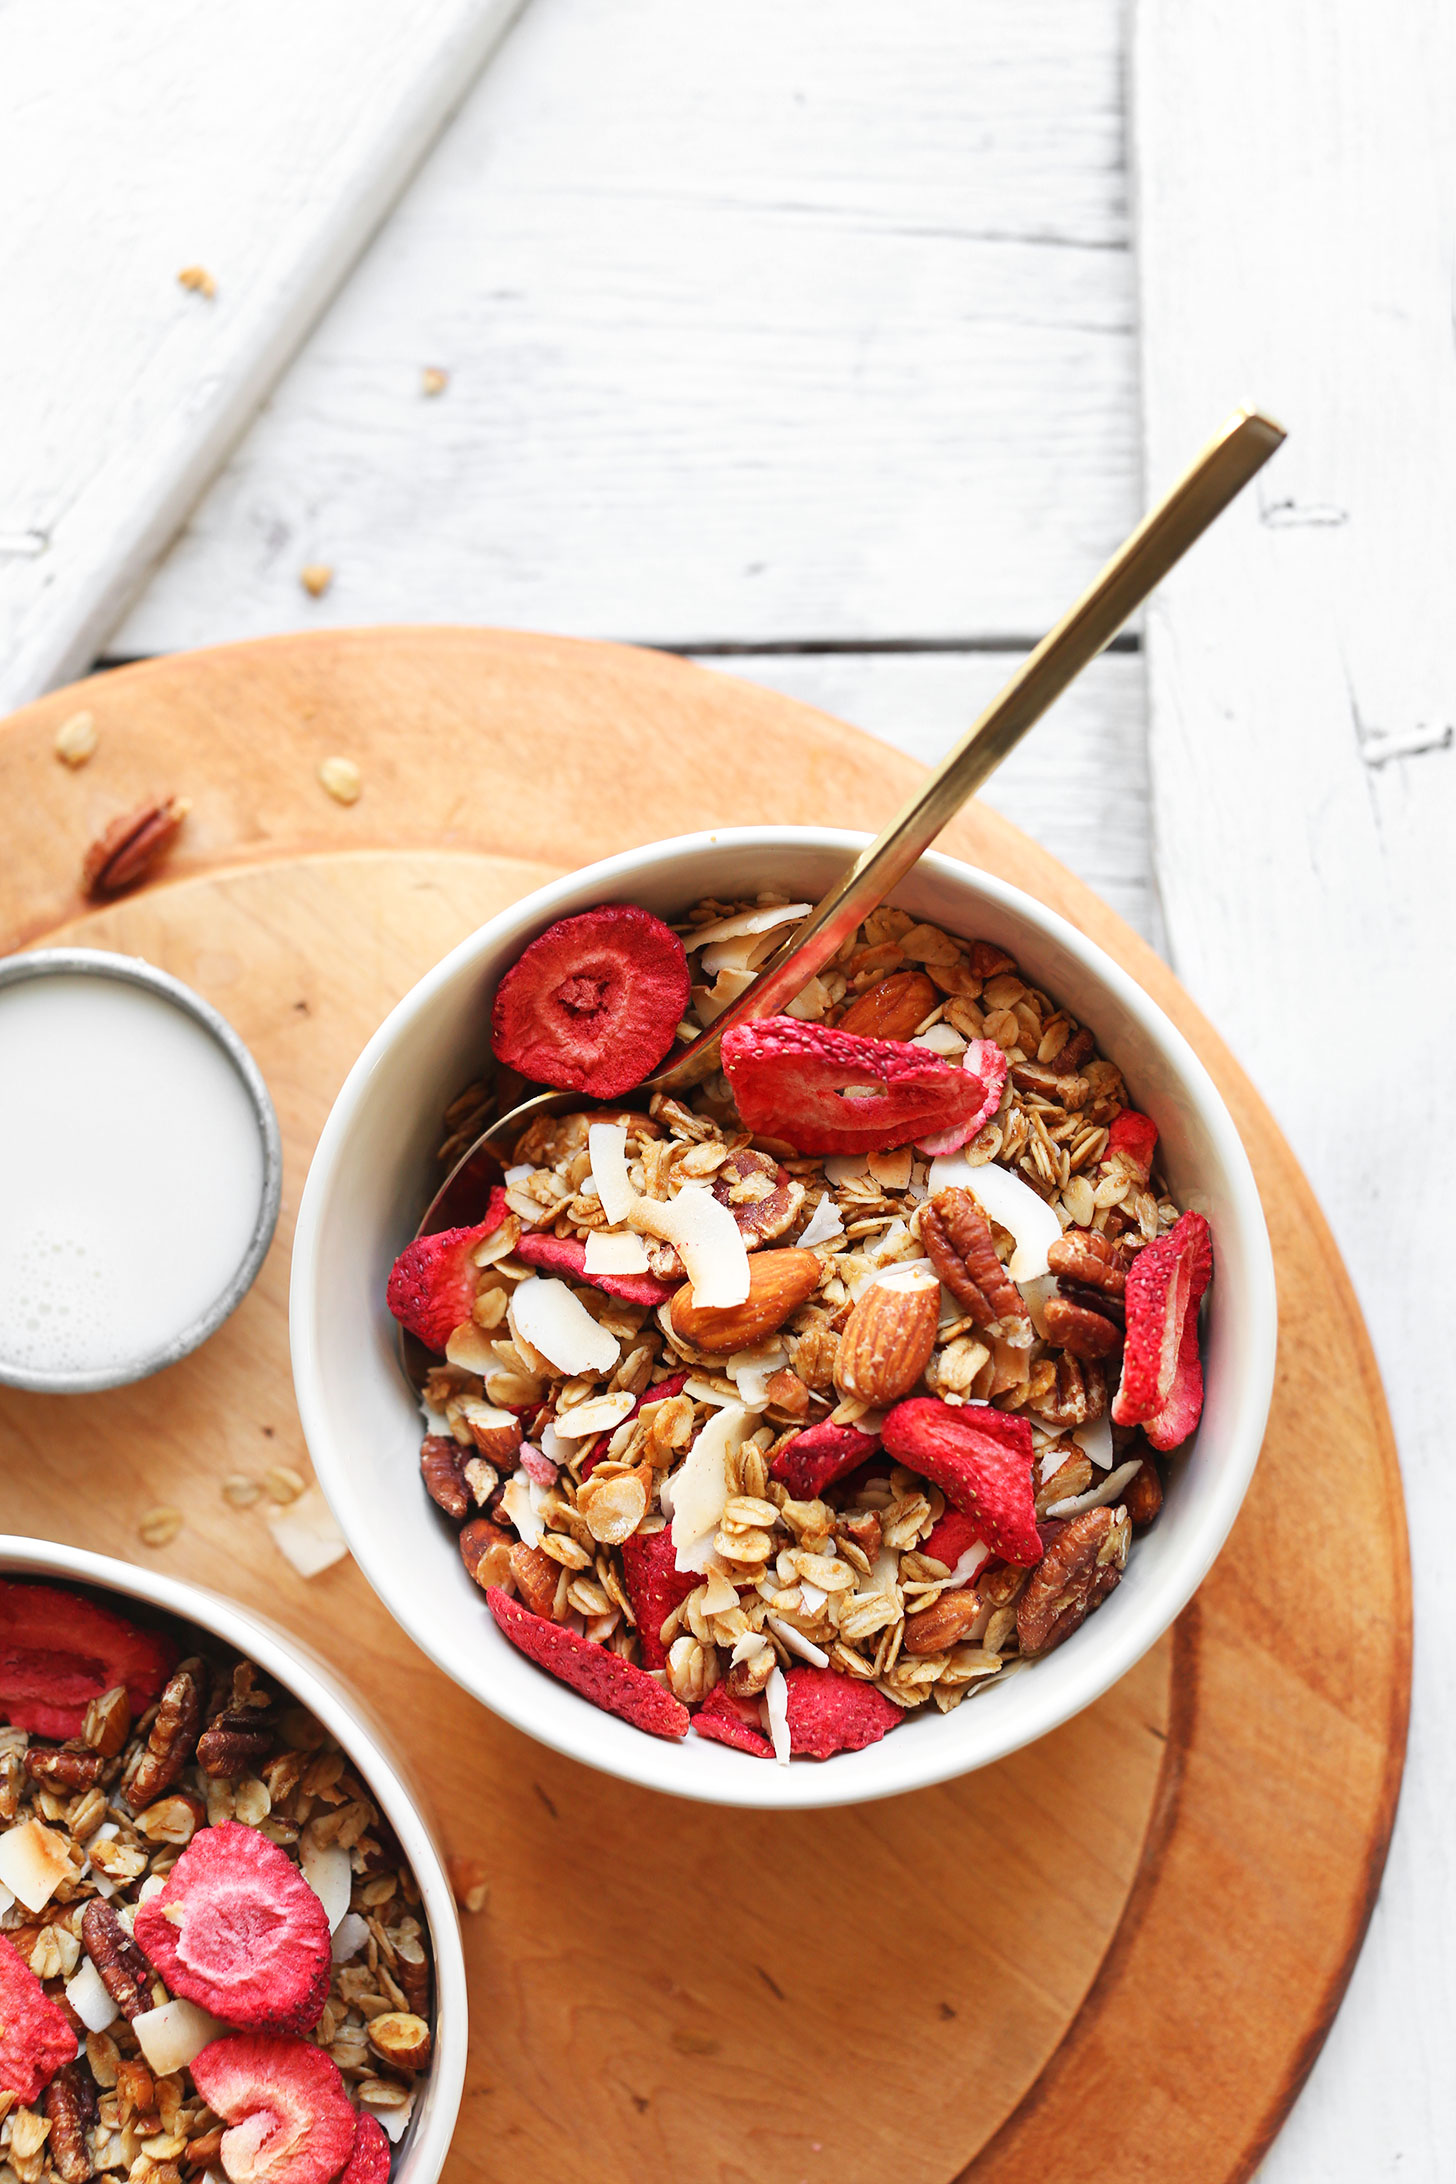 Bowls of our naturally-sweetened gluten-free Coconut Strawberry Granola recipe